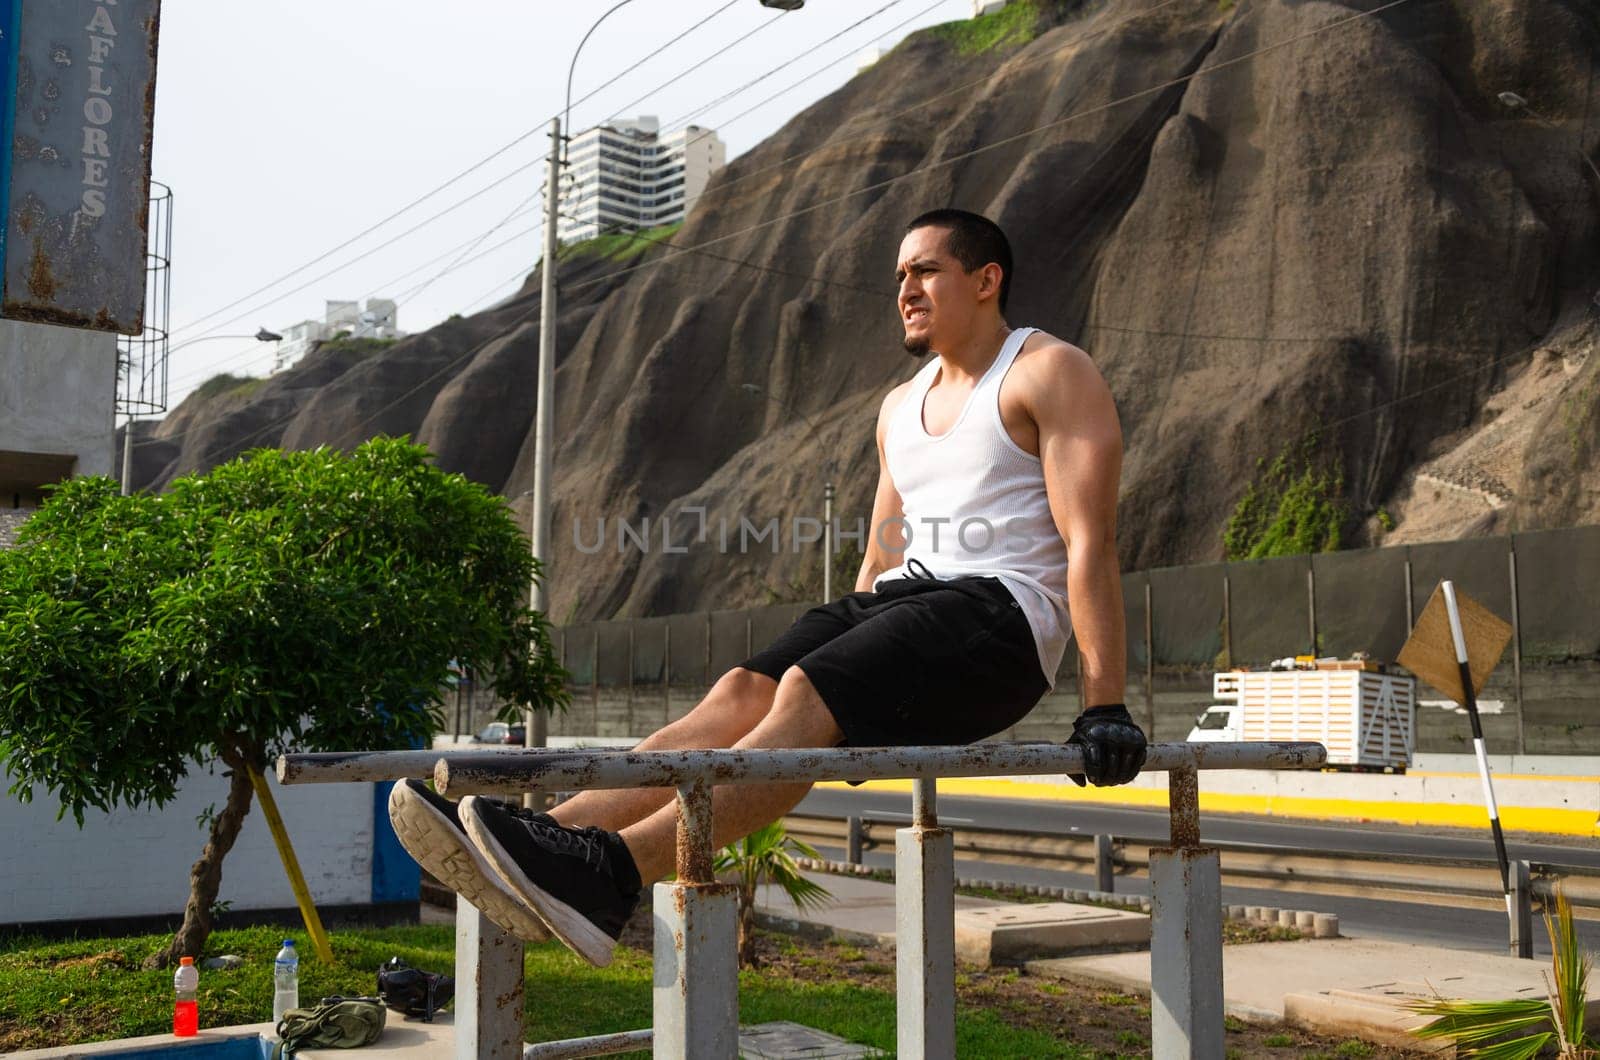 Handsome man exercising on parallel bars on the street outdoors. by Peruphotoart